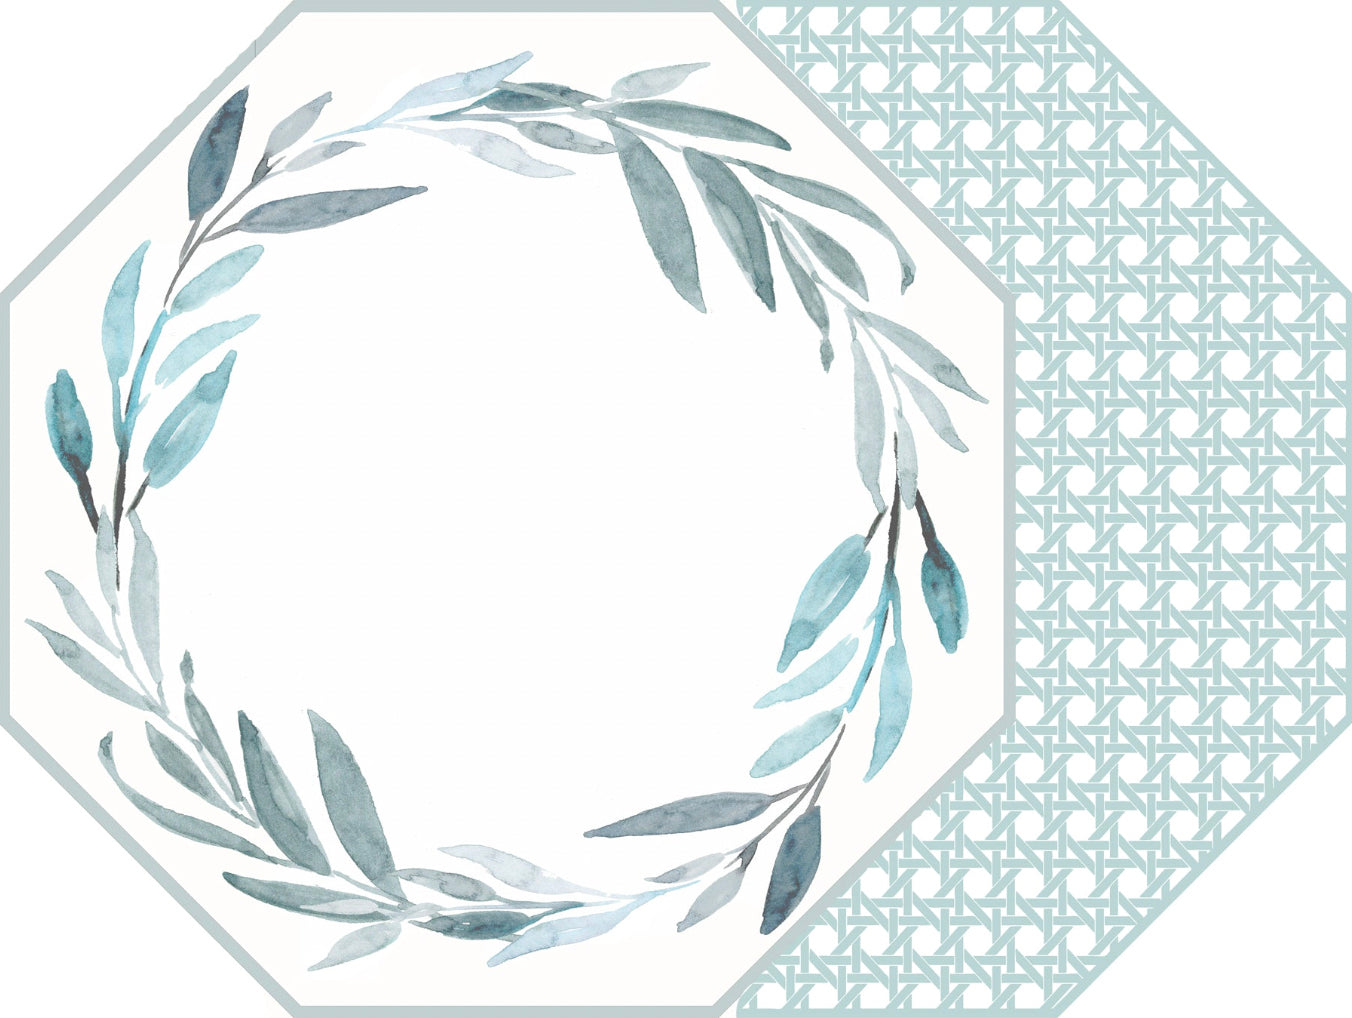 OCTAGONAL TWO SIDED LEAVES WREATH PLACEMAT WITH CANE ~ SEA